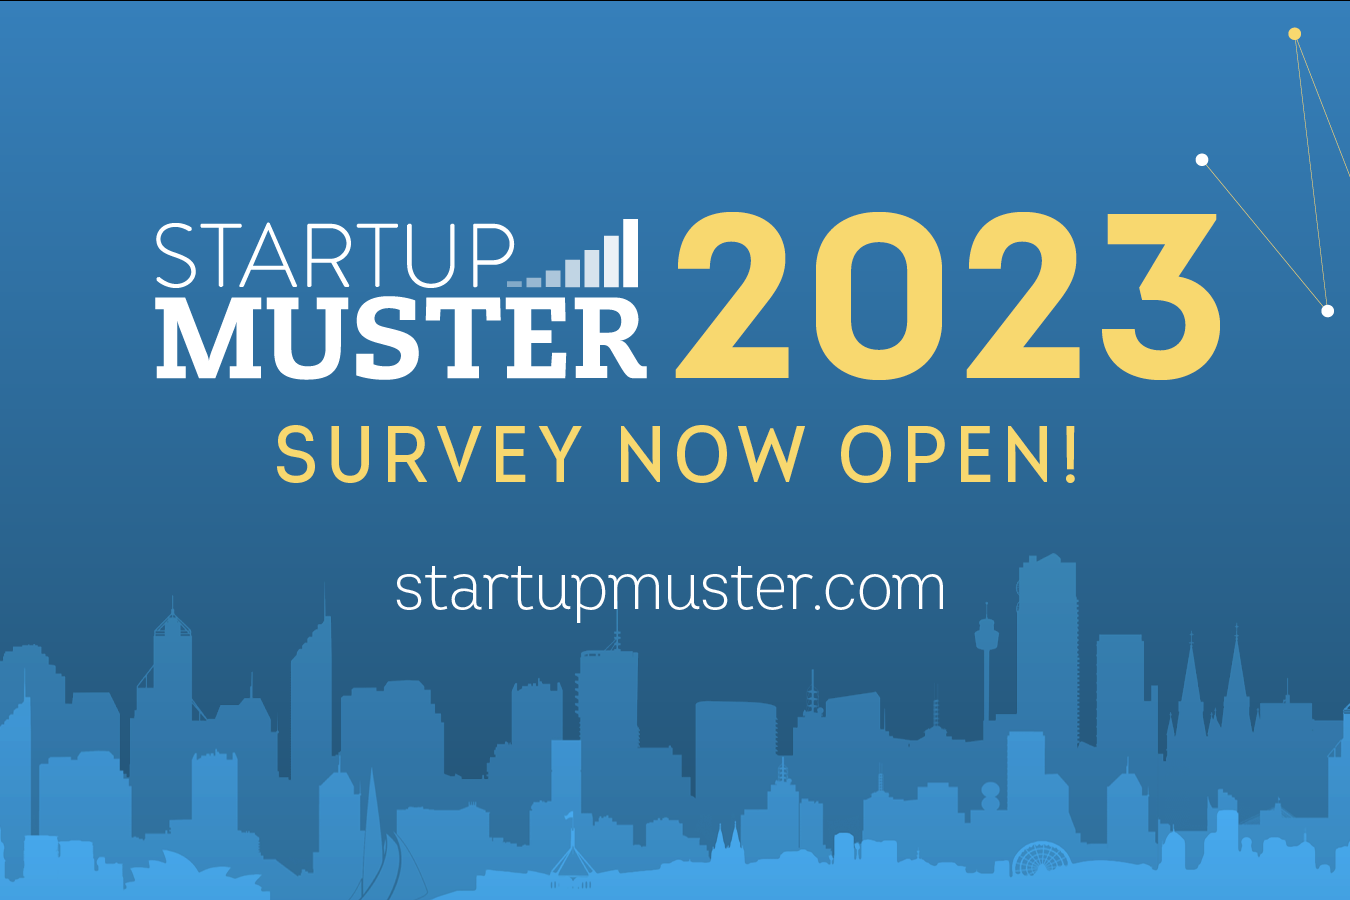 Promotional banner that reads "Startup Muster 2023 Survey now open!"